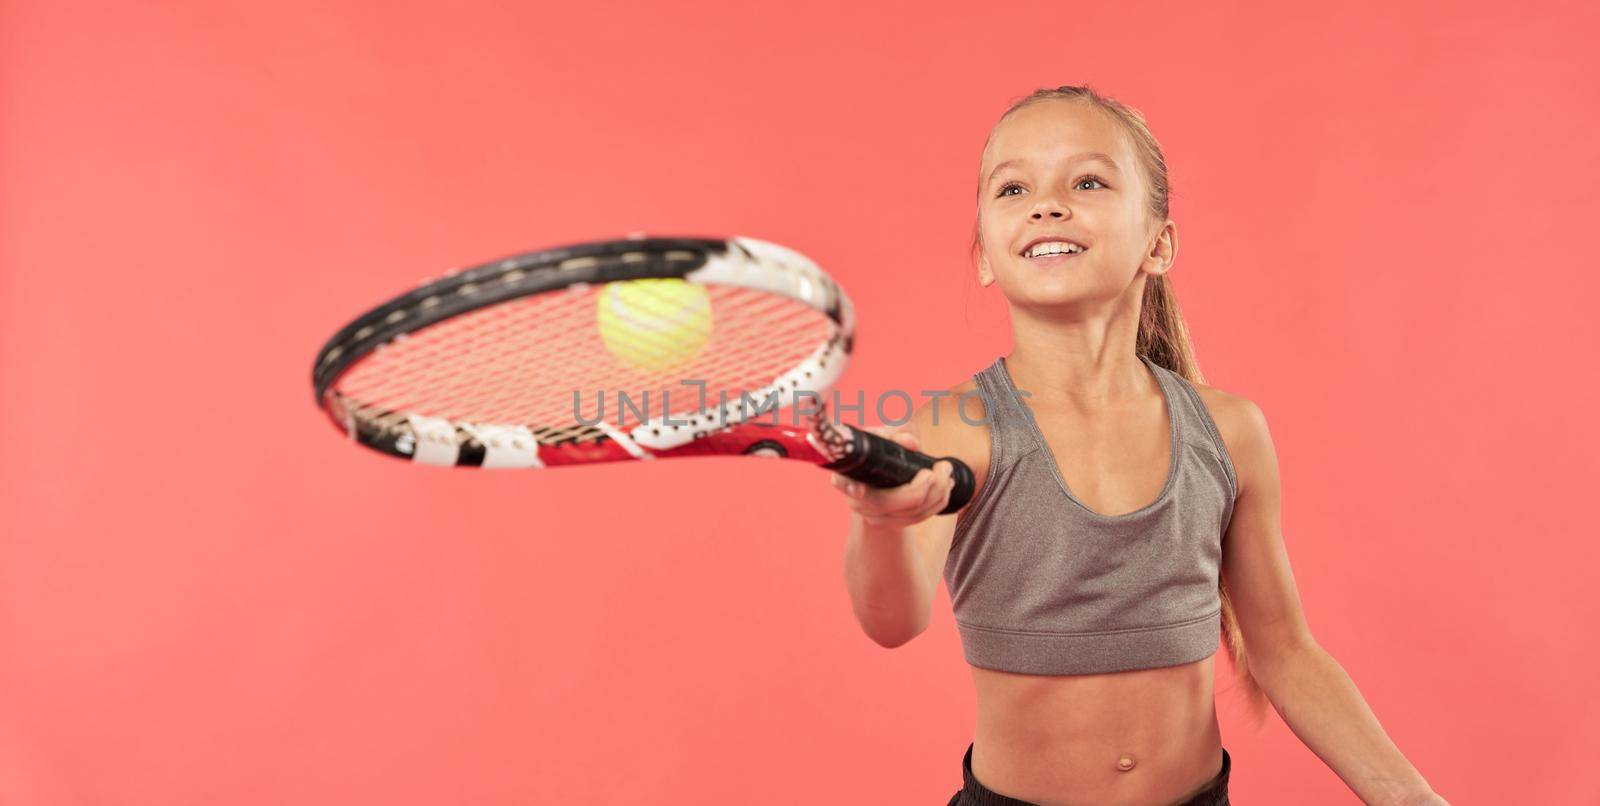 Adorable girl tennis player wearing sports crop top while bouncing tennis ball on racket and smiling